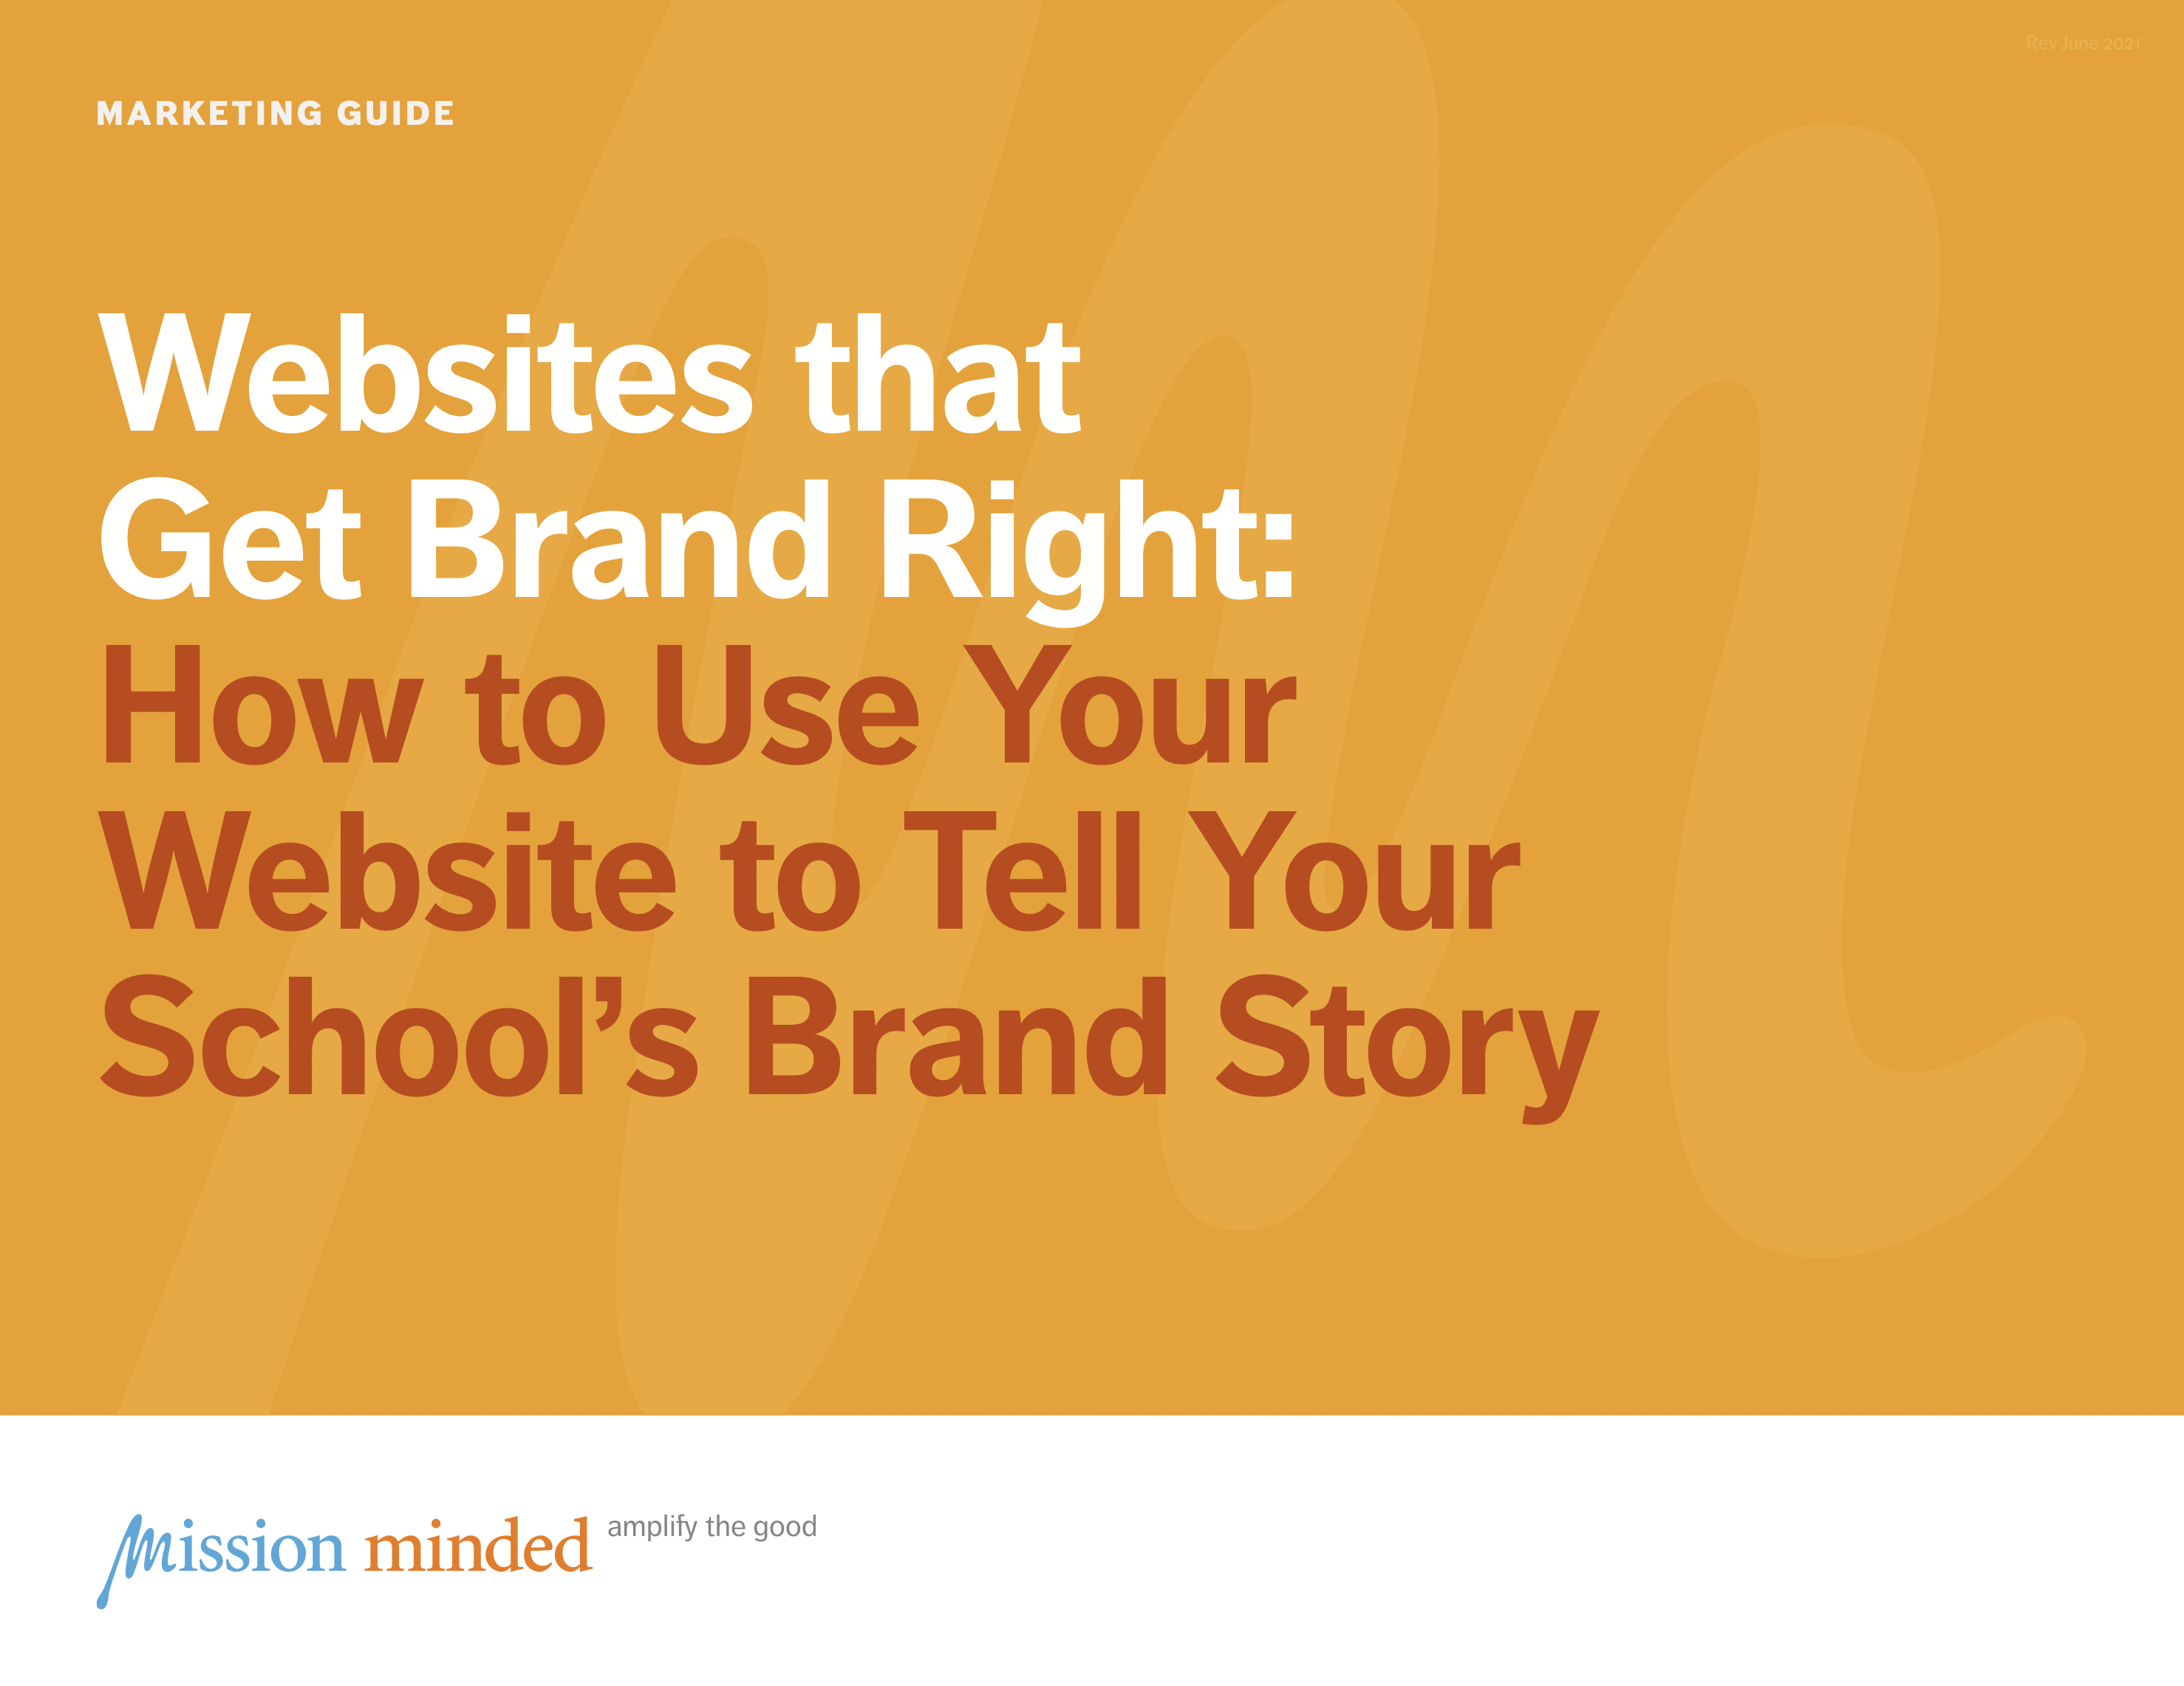 School Websites that Get Brand Right | How to Use Your Website to Tell Your School's Brand Story